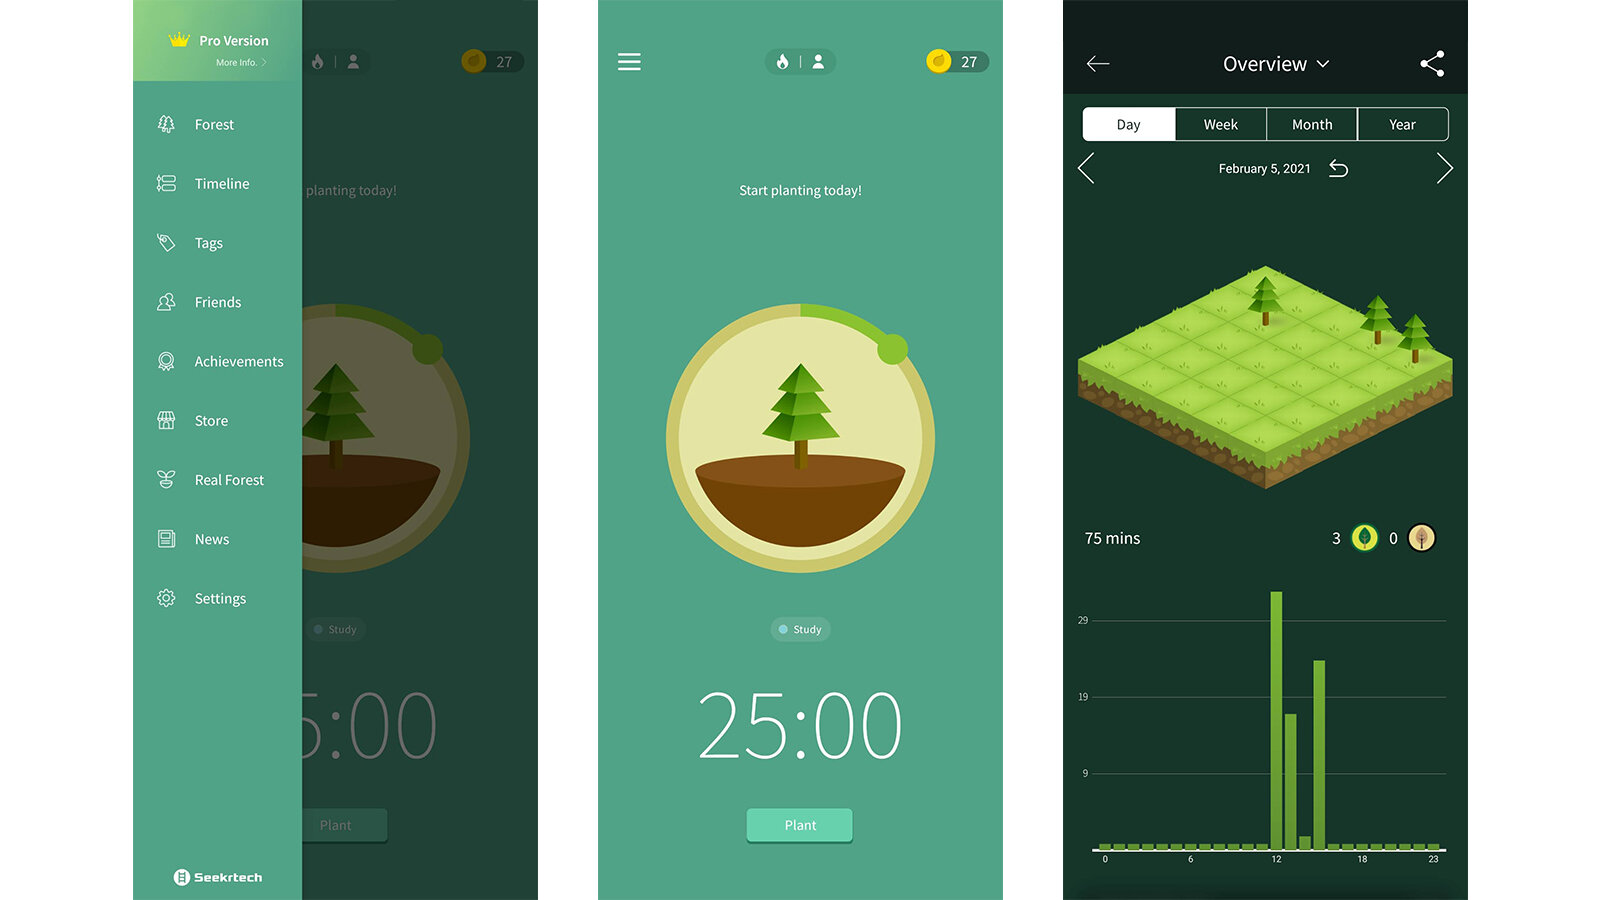 Forest app home page